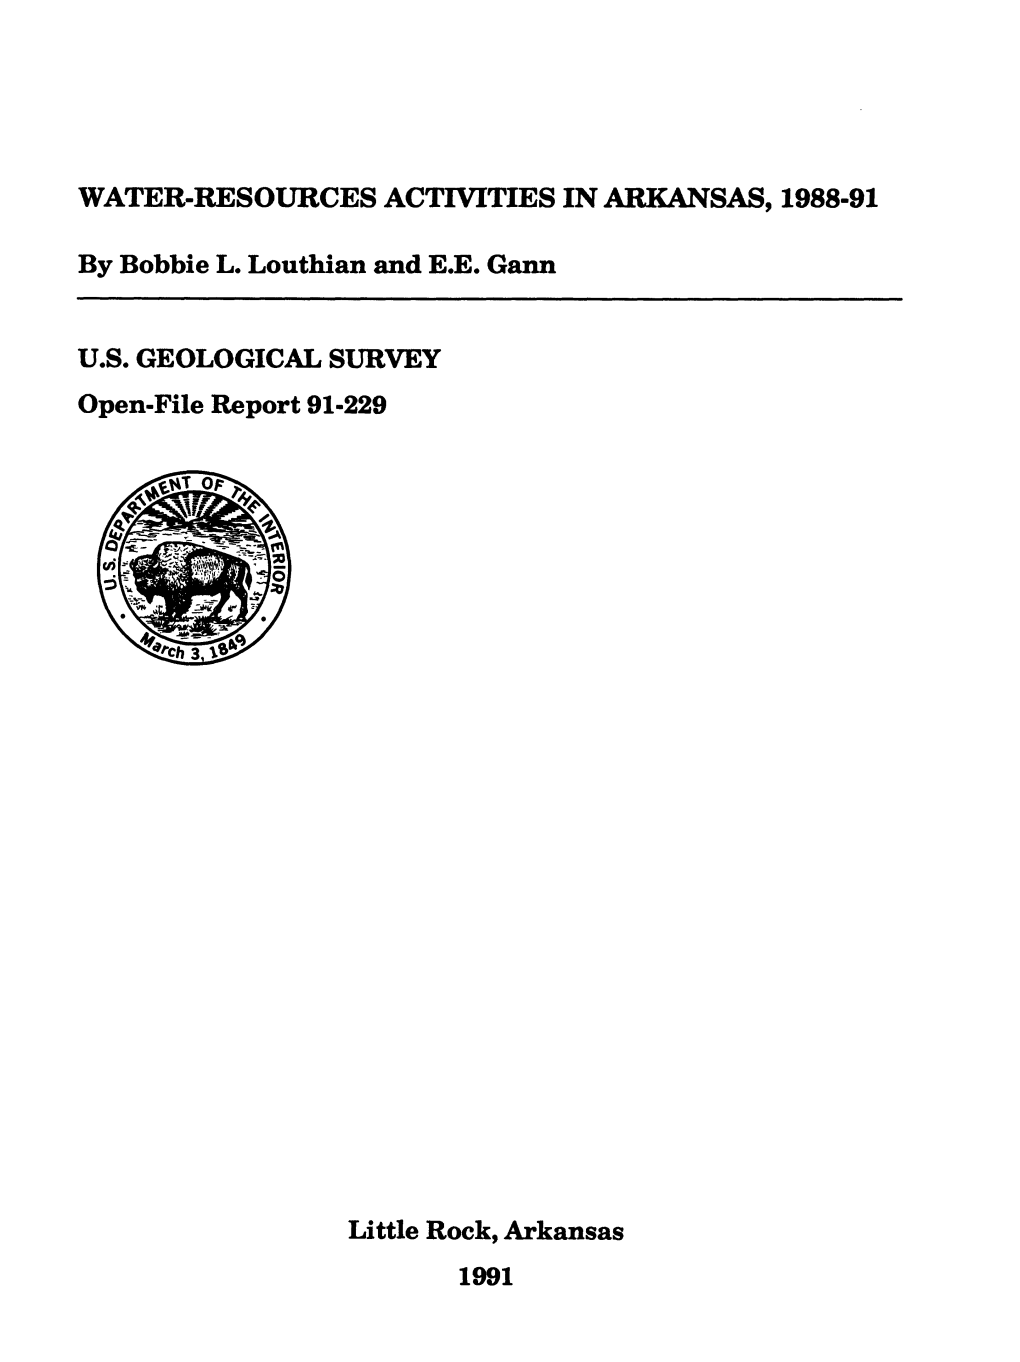 WATER-RESOURCES ACTIVITIES in ARKANSAS, 1988-91 by Bobbie L. Louthian and E.E. Gann U.S. GEOLOGICAL SURVEY Open-File Report 91-2